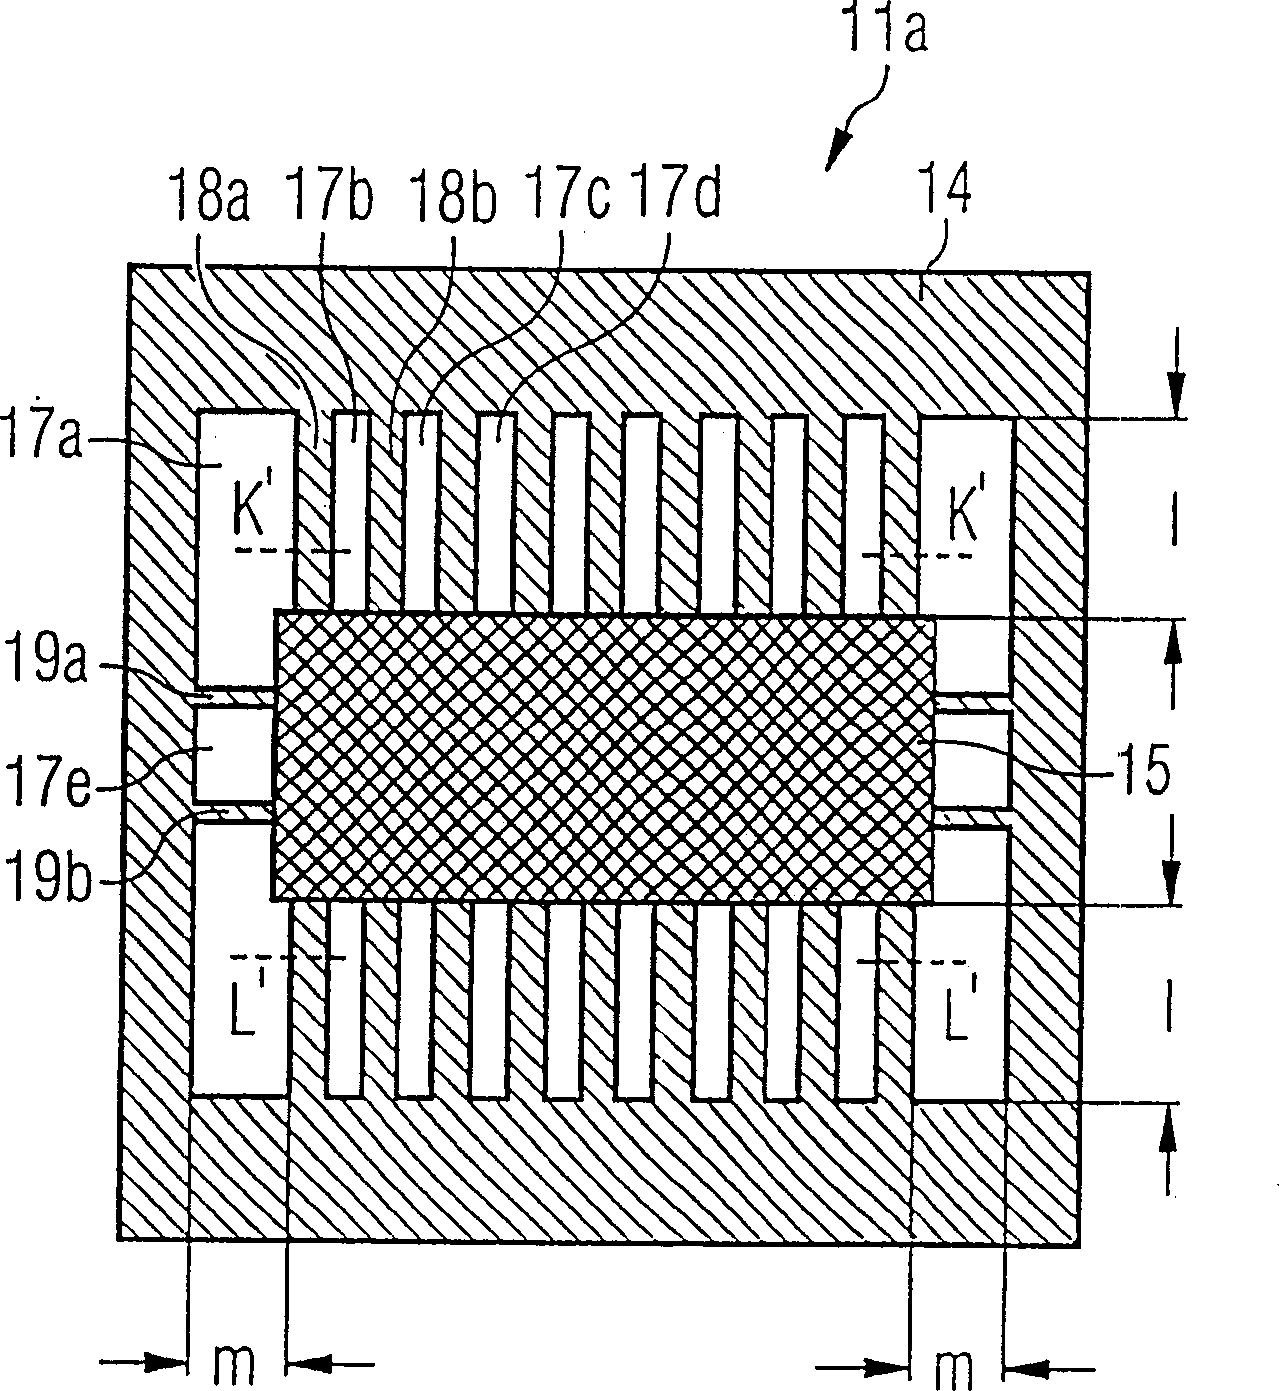 Casing. esp. for semiconductor device, foot of such semiconductor device and mfg. method of such foot